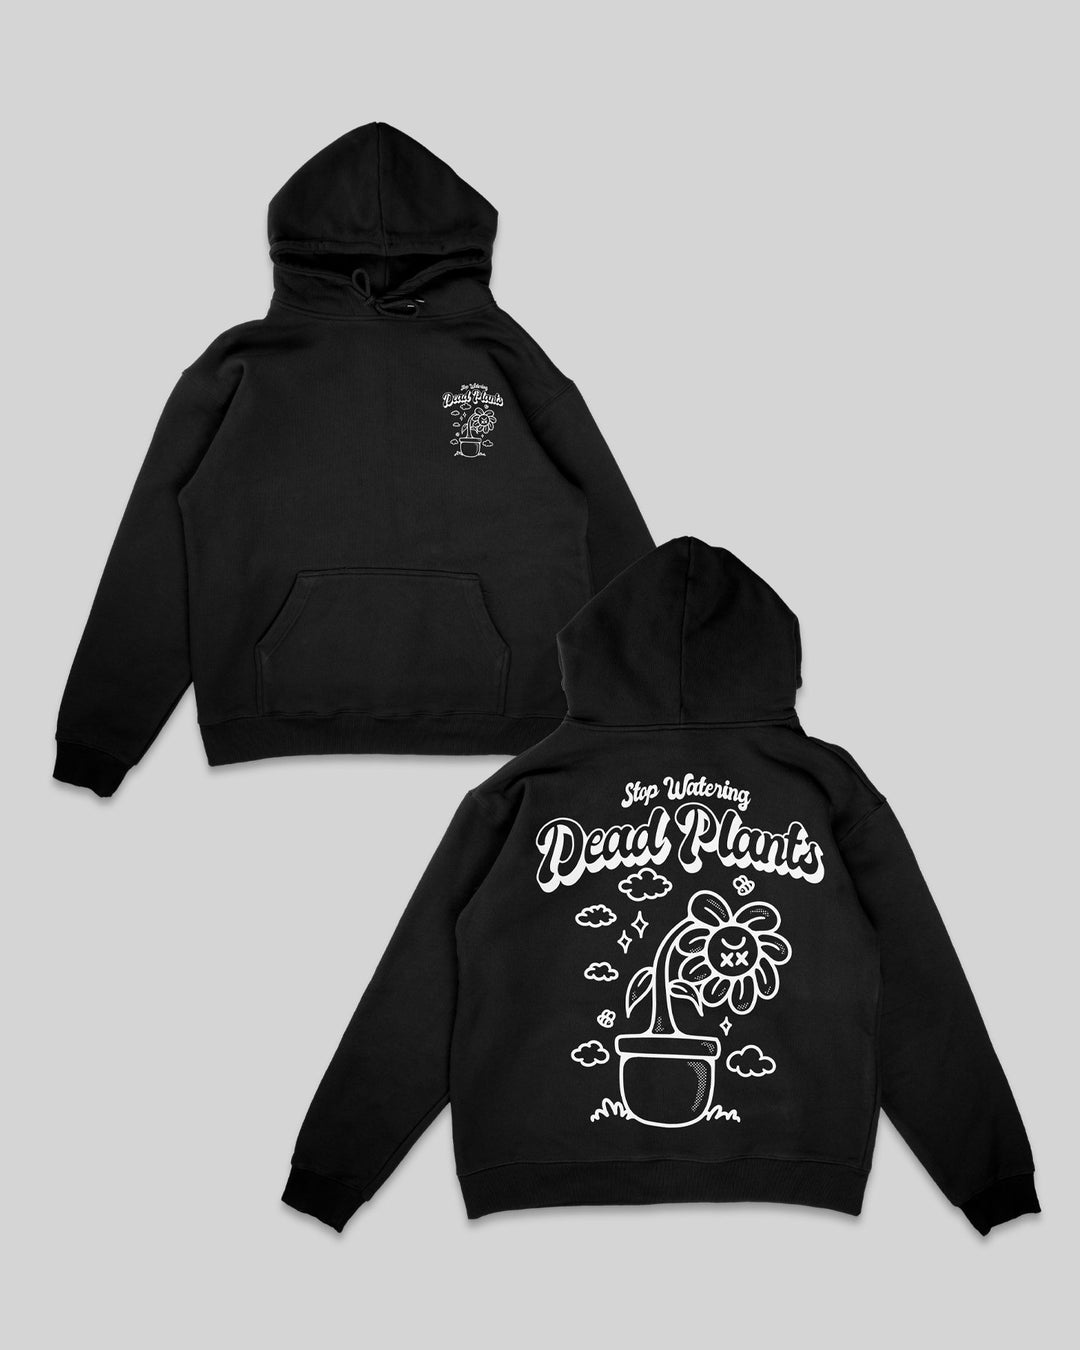 Stop Watering Dead Plants V3 Black Hoodie - trainofthoughtcollective